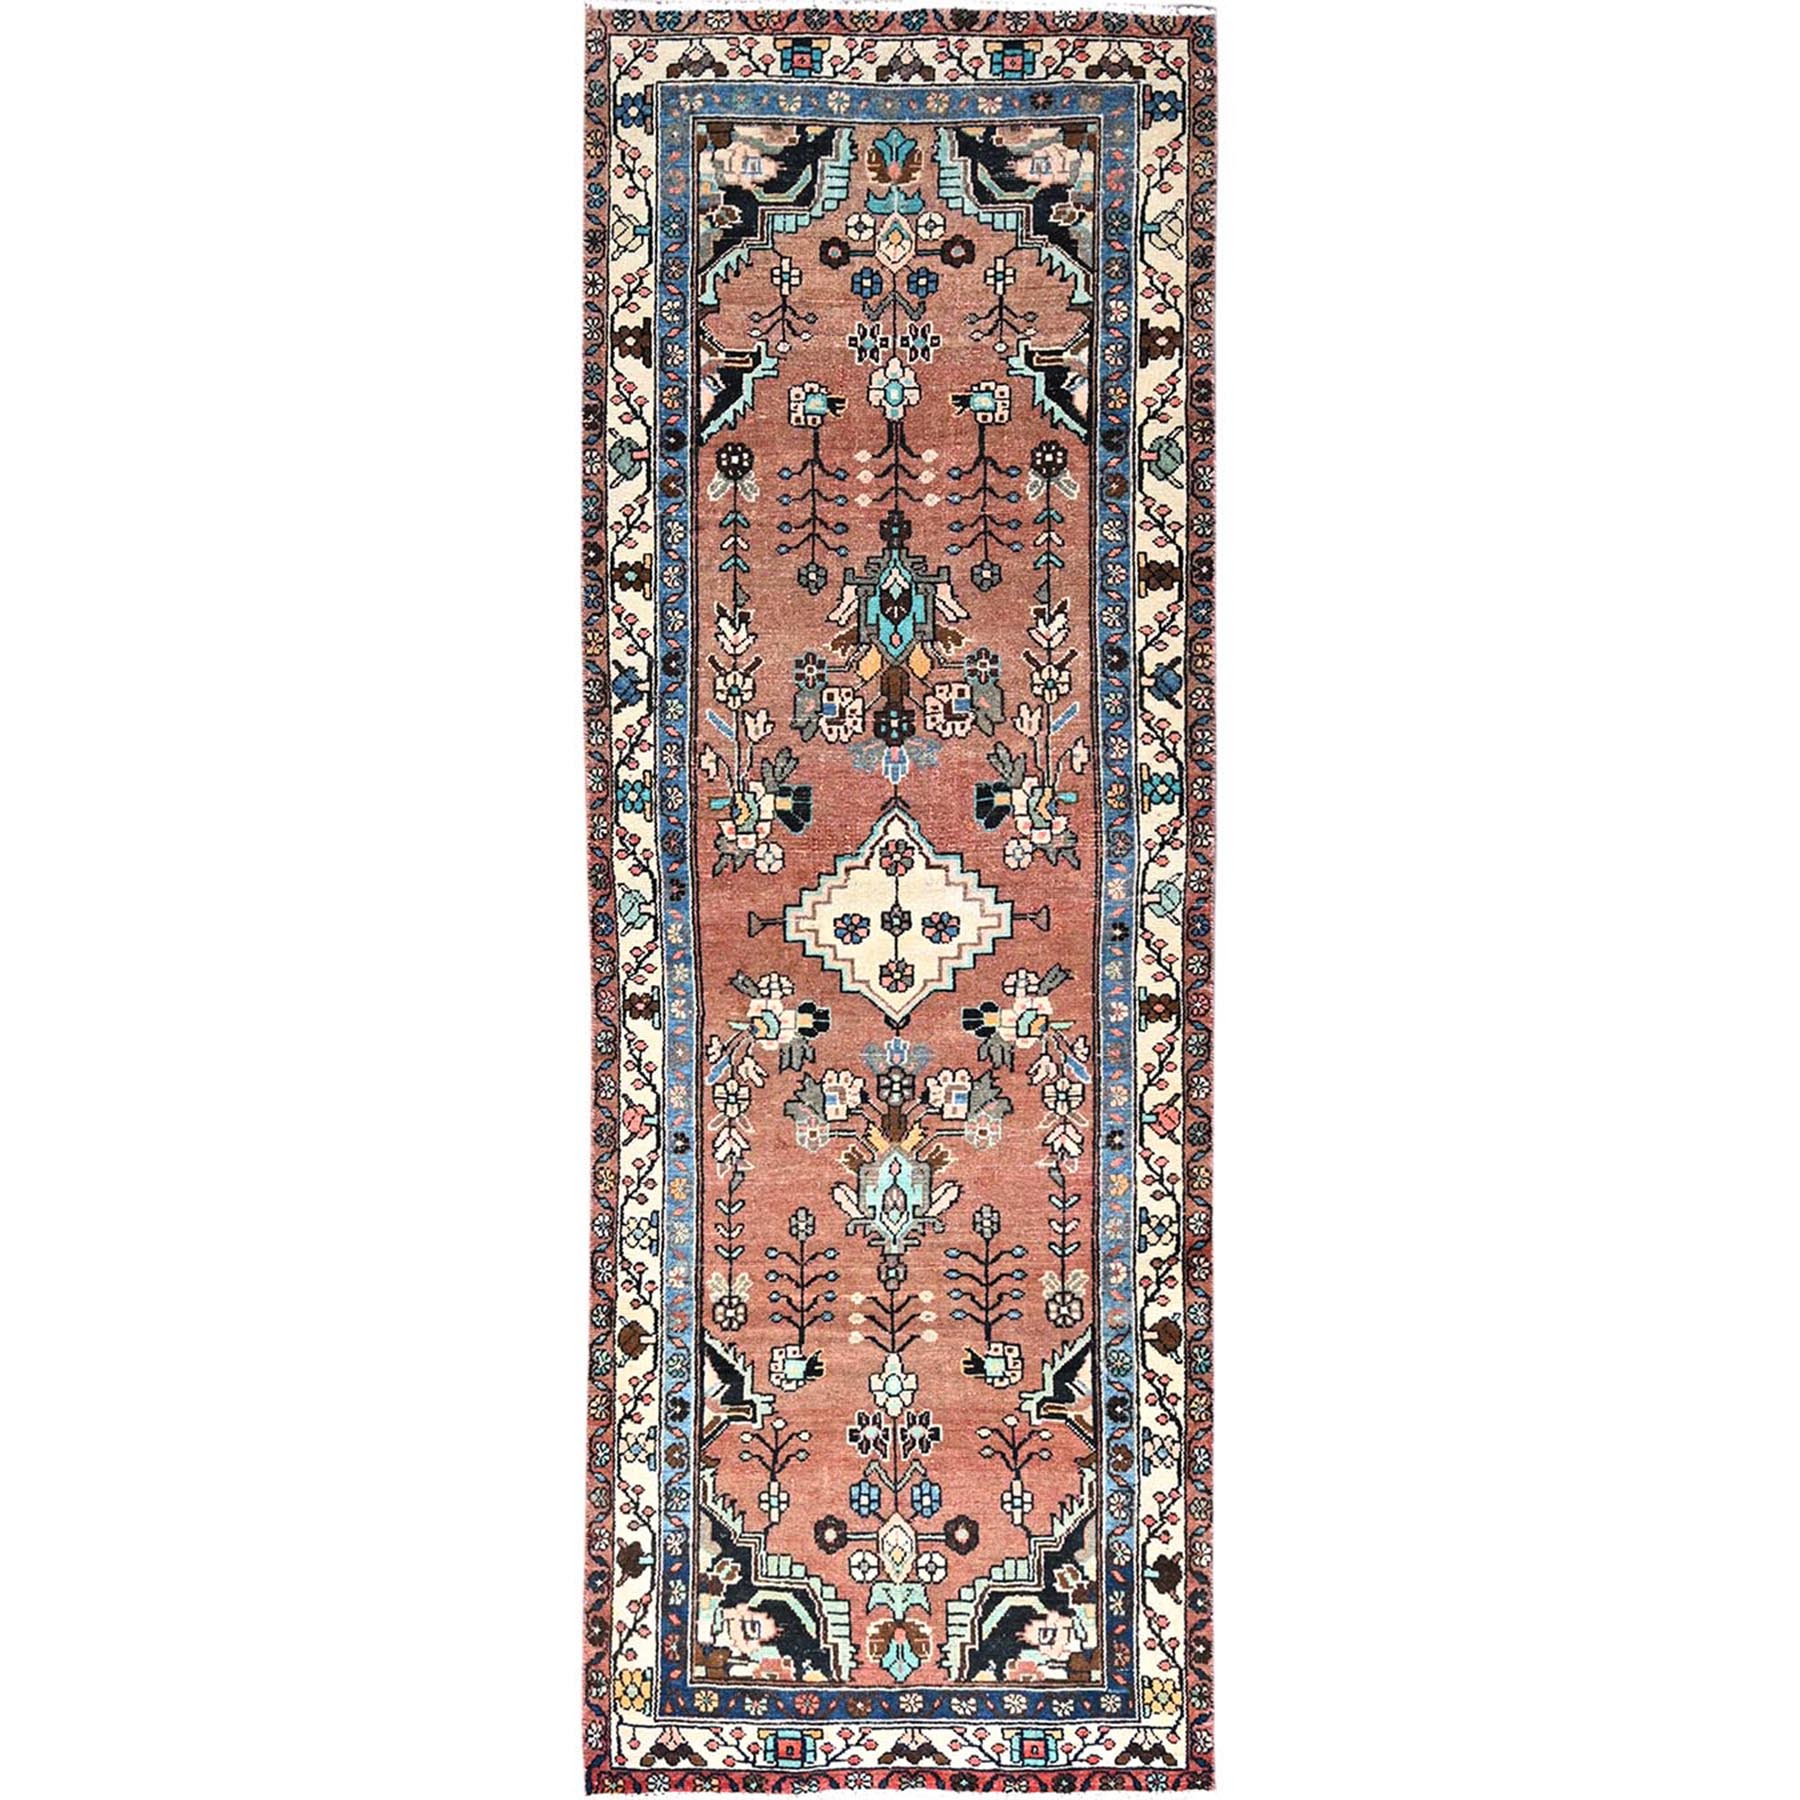  Wool Hand-Knotted Area Rug 3'4